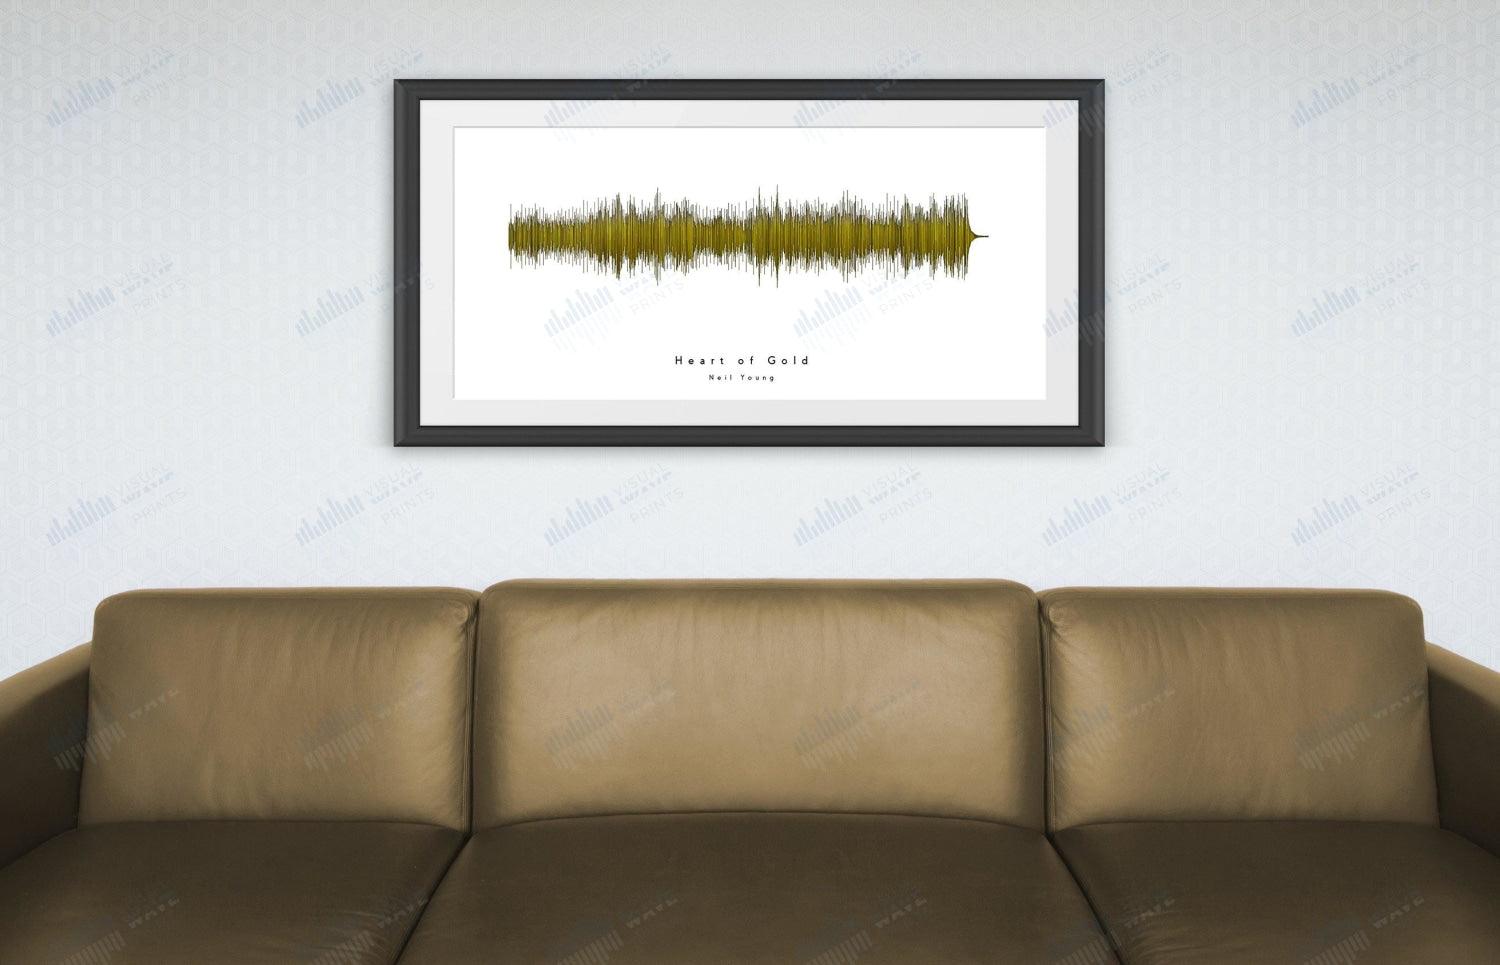 Heart of Gold by Neil Young - Visual Wave Prints